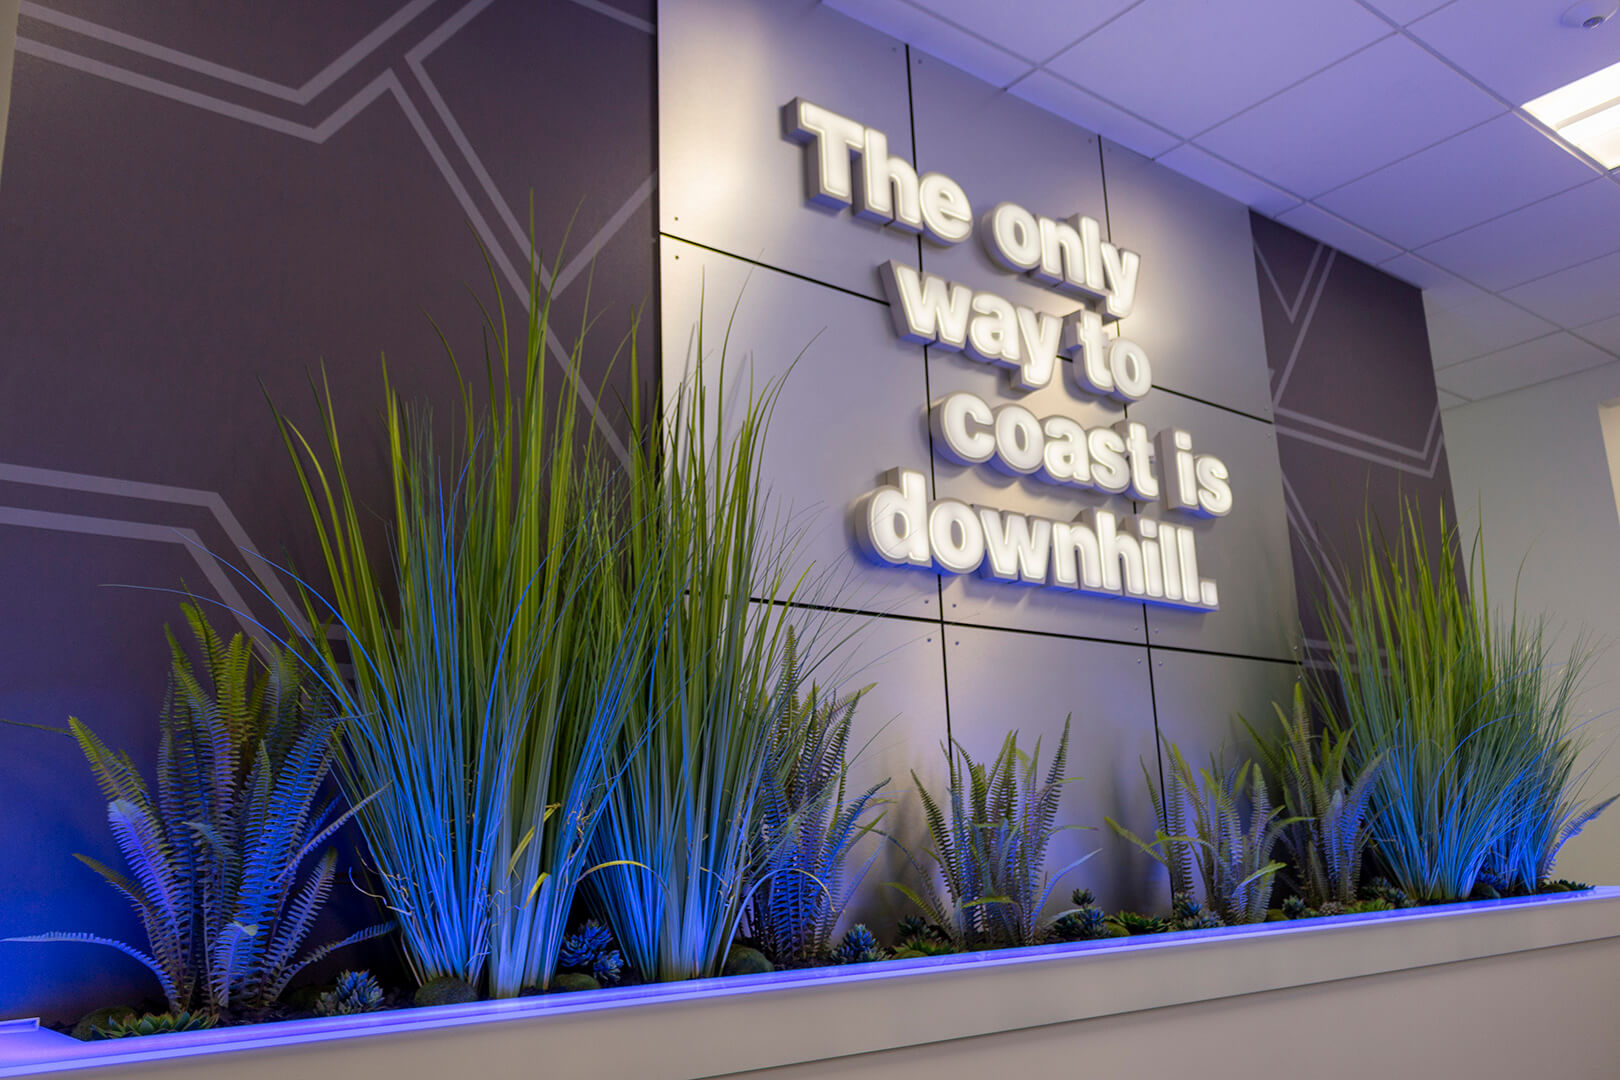 Quote wall reading "the only way to coast is downhill," created by ZENTX for Saginaw Control and Engineering's offices